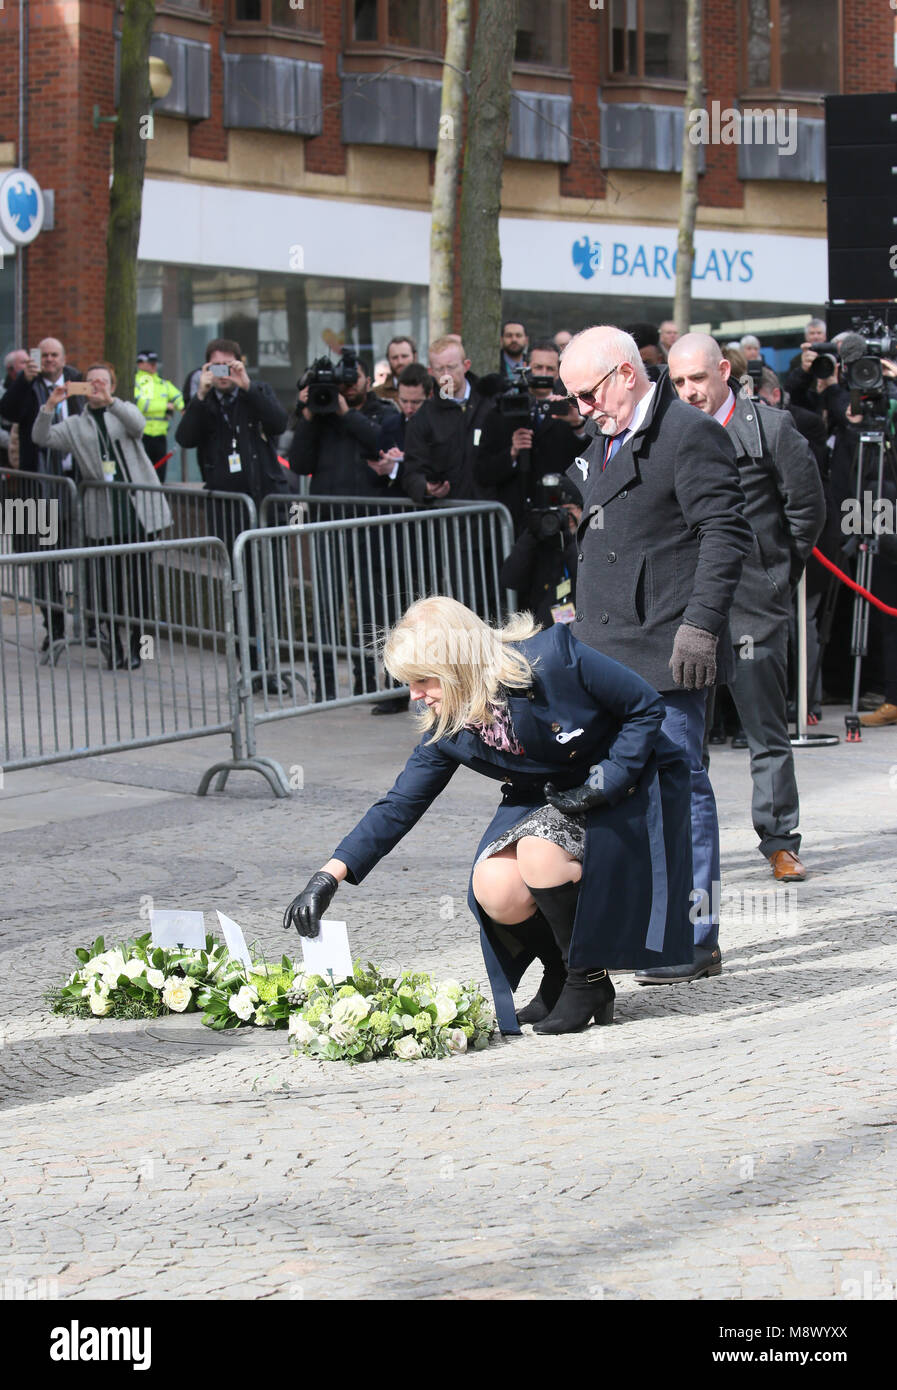 Warrington, UK. 20th Mar, 2018. Colin and Wendy Parry laying flowers at anniversary memorial of the IRA bomb which killed Jonathan Ball and Tim Parry in Warrington, 20th March, 2018 (C)Barbara Cook/Alamy Live News Stock Photo